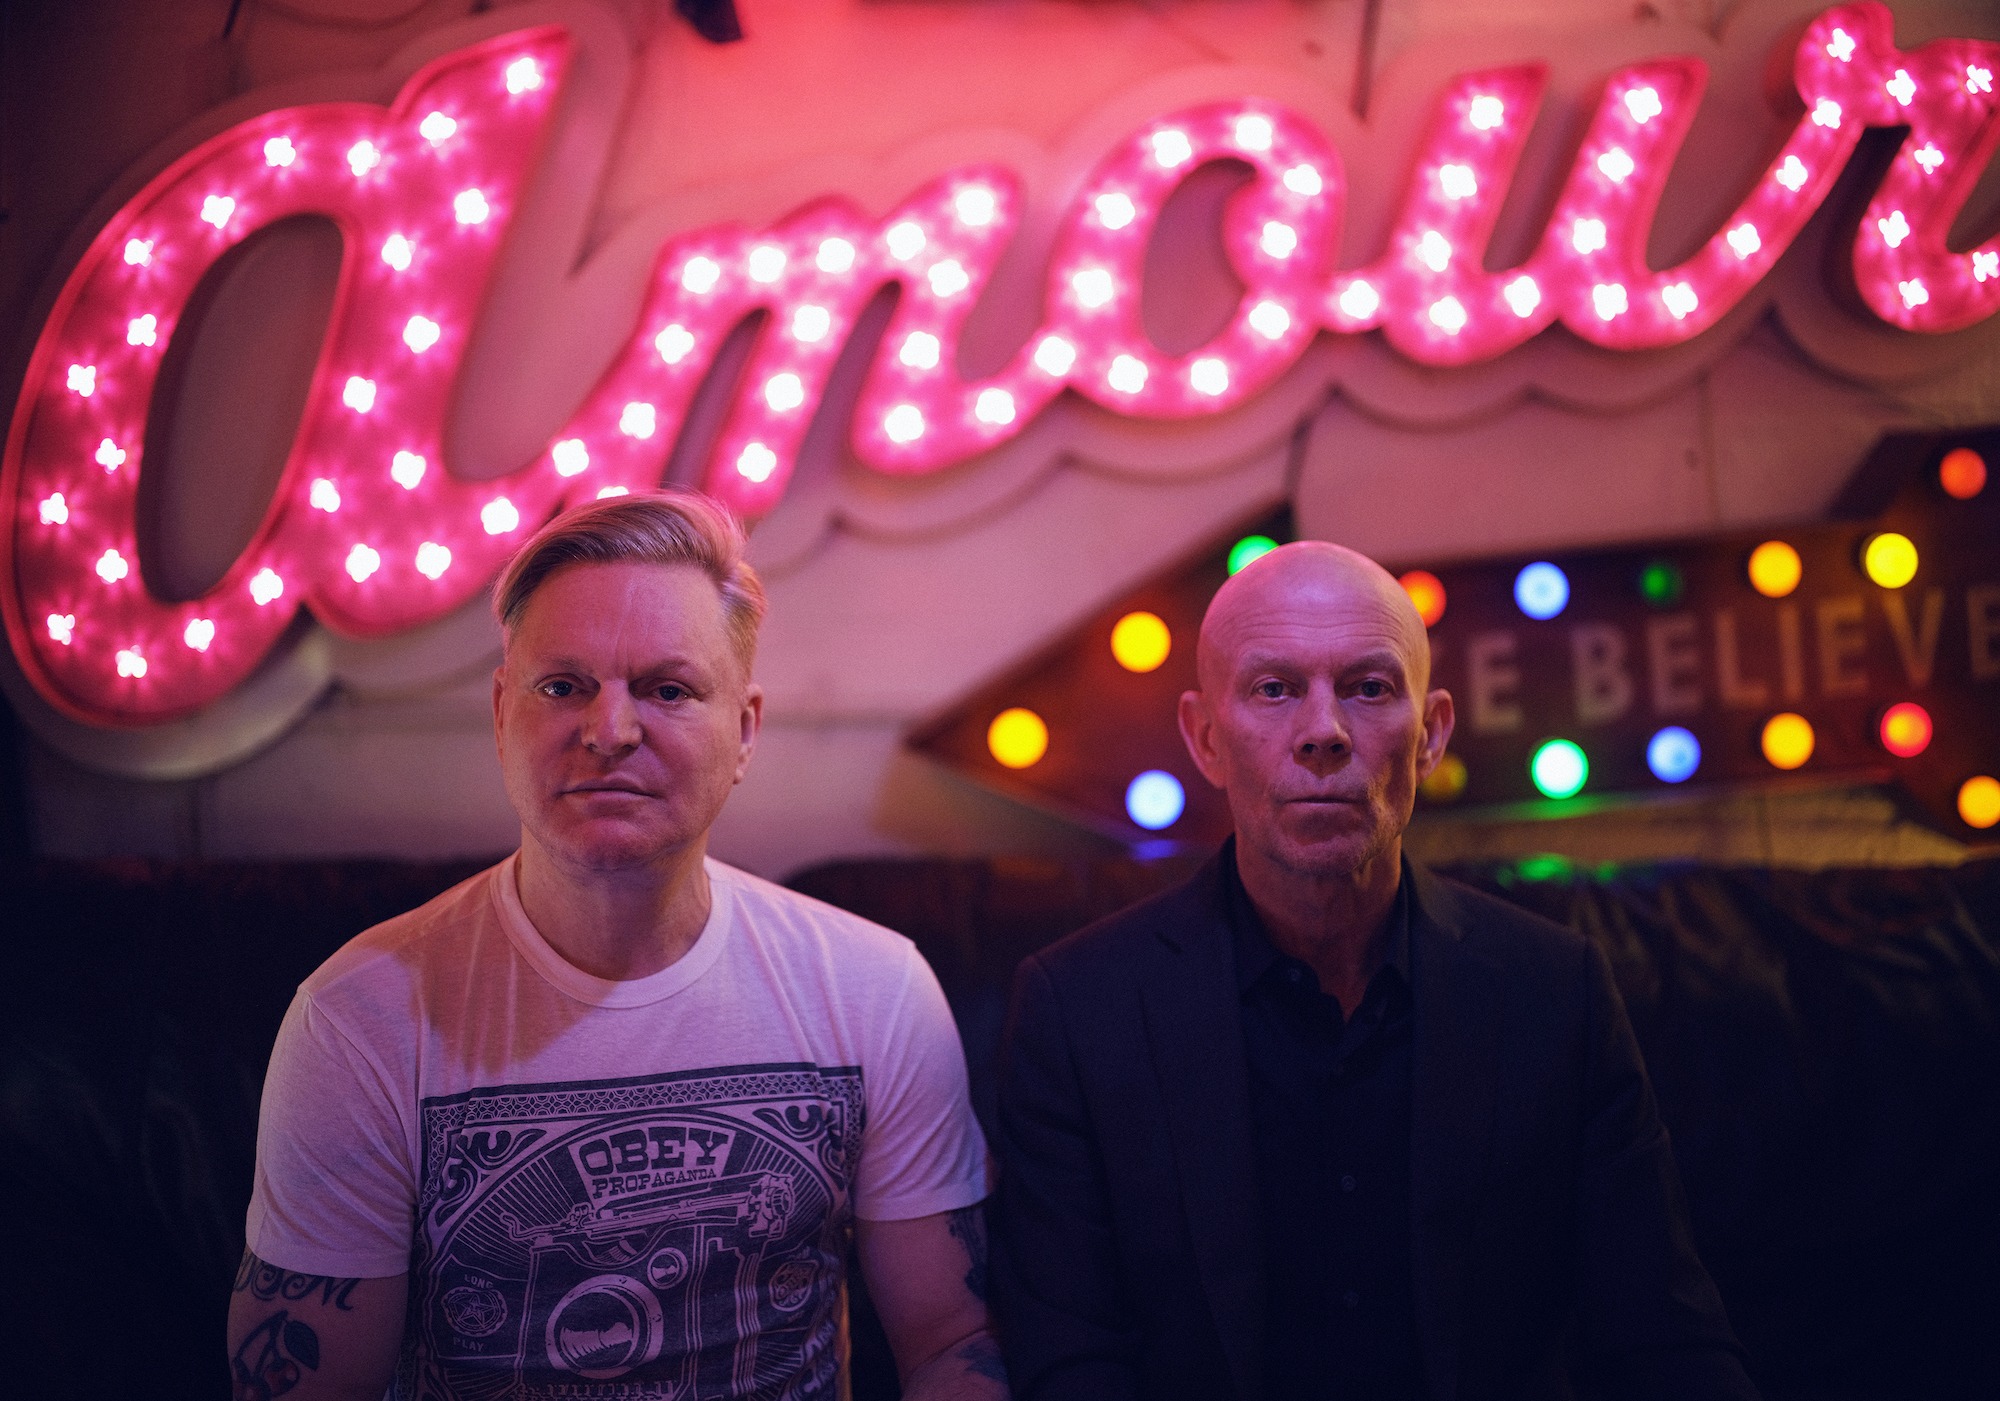 ERASURE announce 2021 tour dates including Dublin's 3Arena on 4TH OCTOBER 1